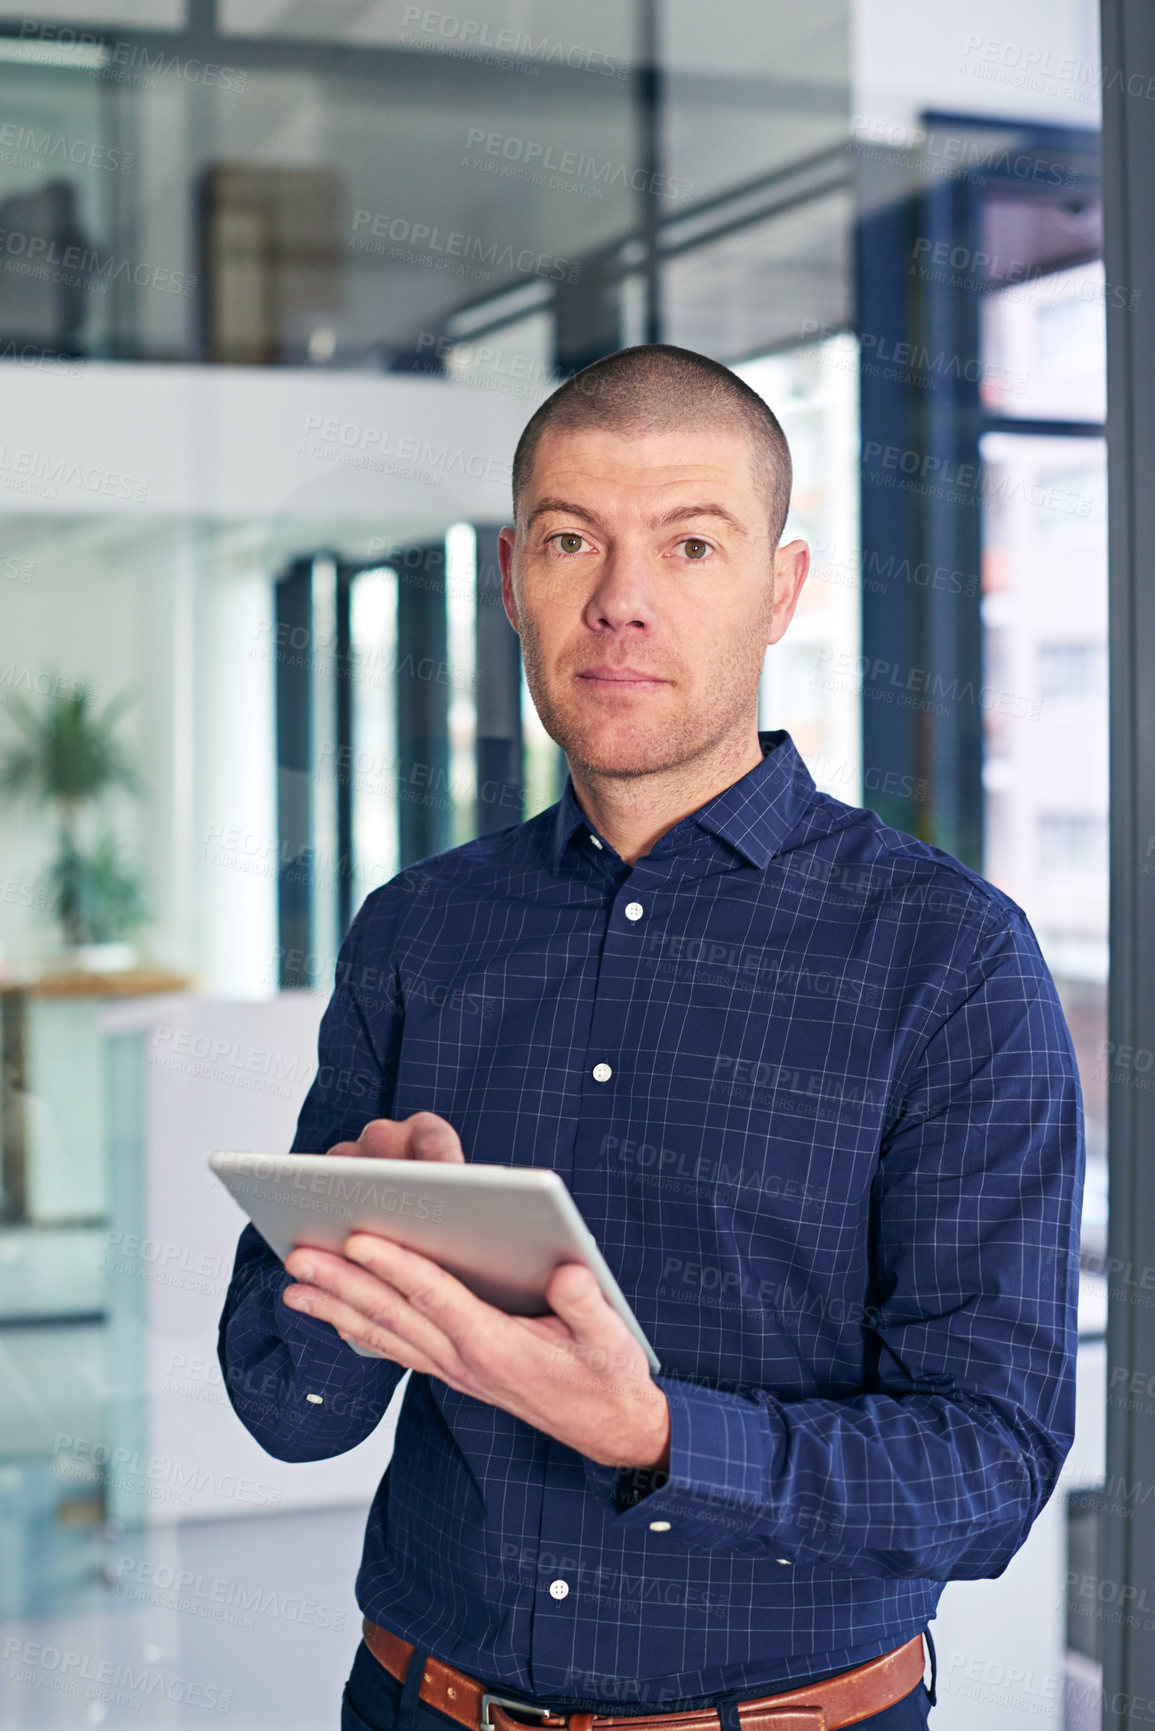 Buy stock photo Portrait of a businessman using a digital tablet in a modern office